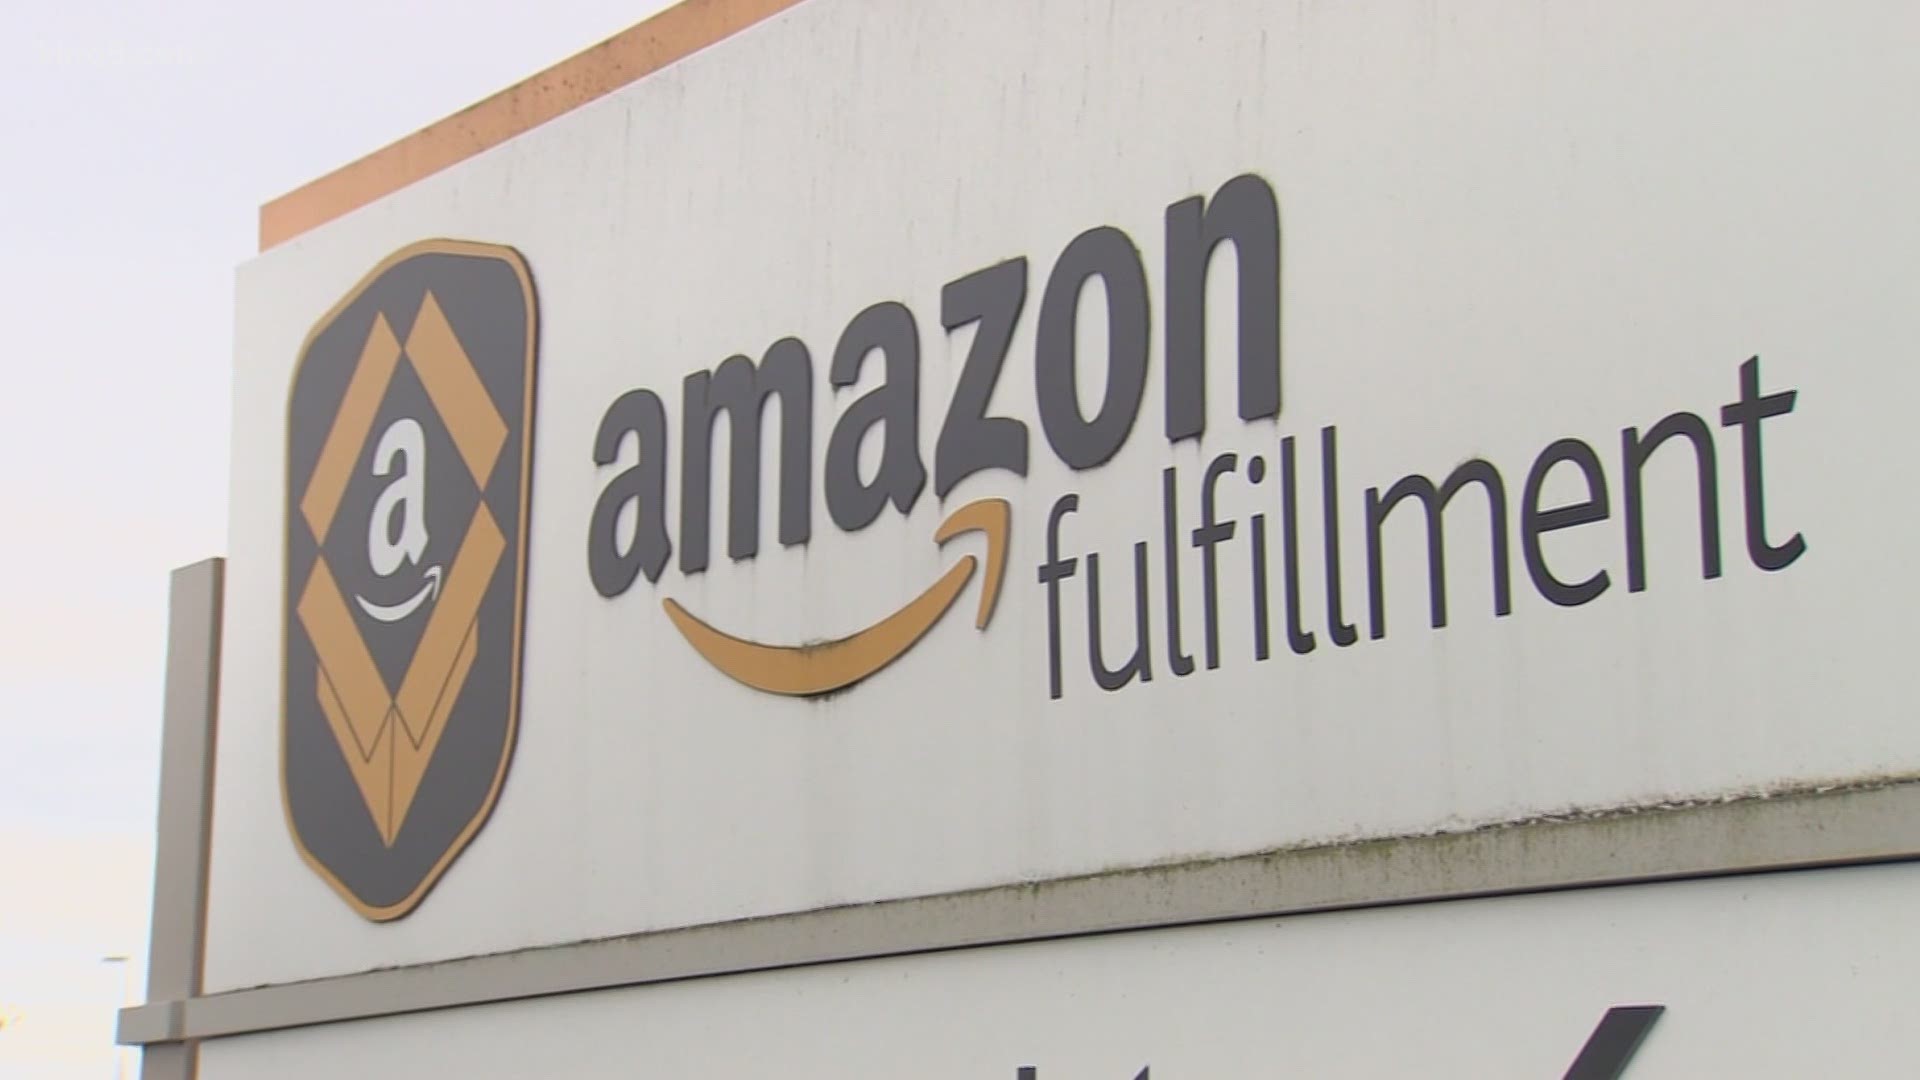 Amazon distribution center workers in Alabama will soon turn in mail-in ballots to decide whether to unionize.